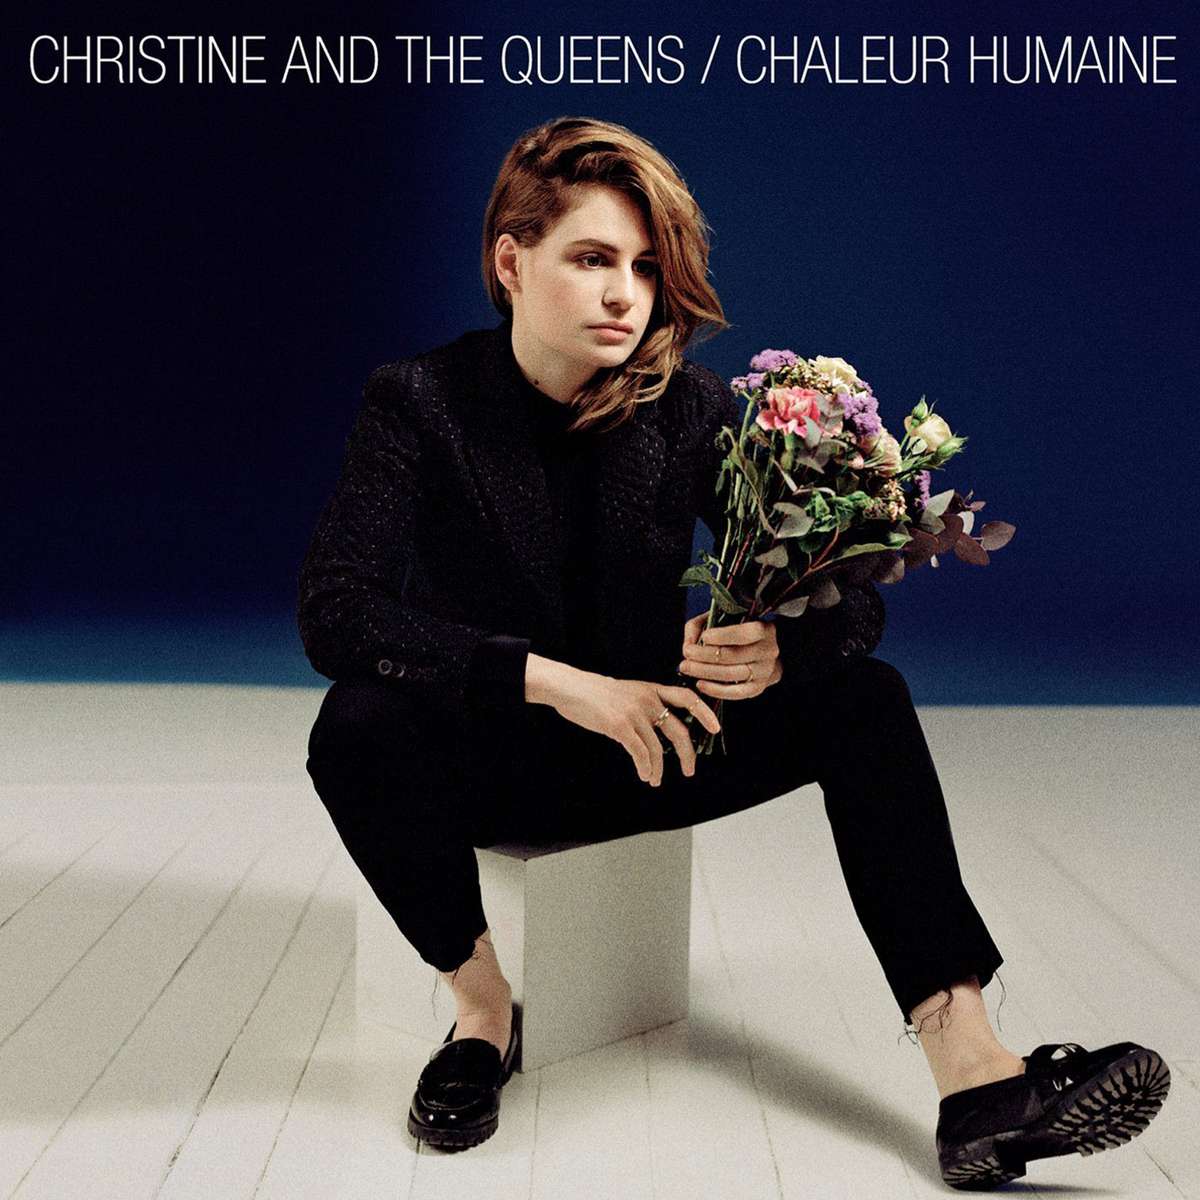 CHRISTINE AND THE QUEENS: IT